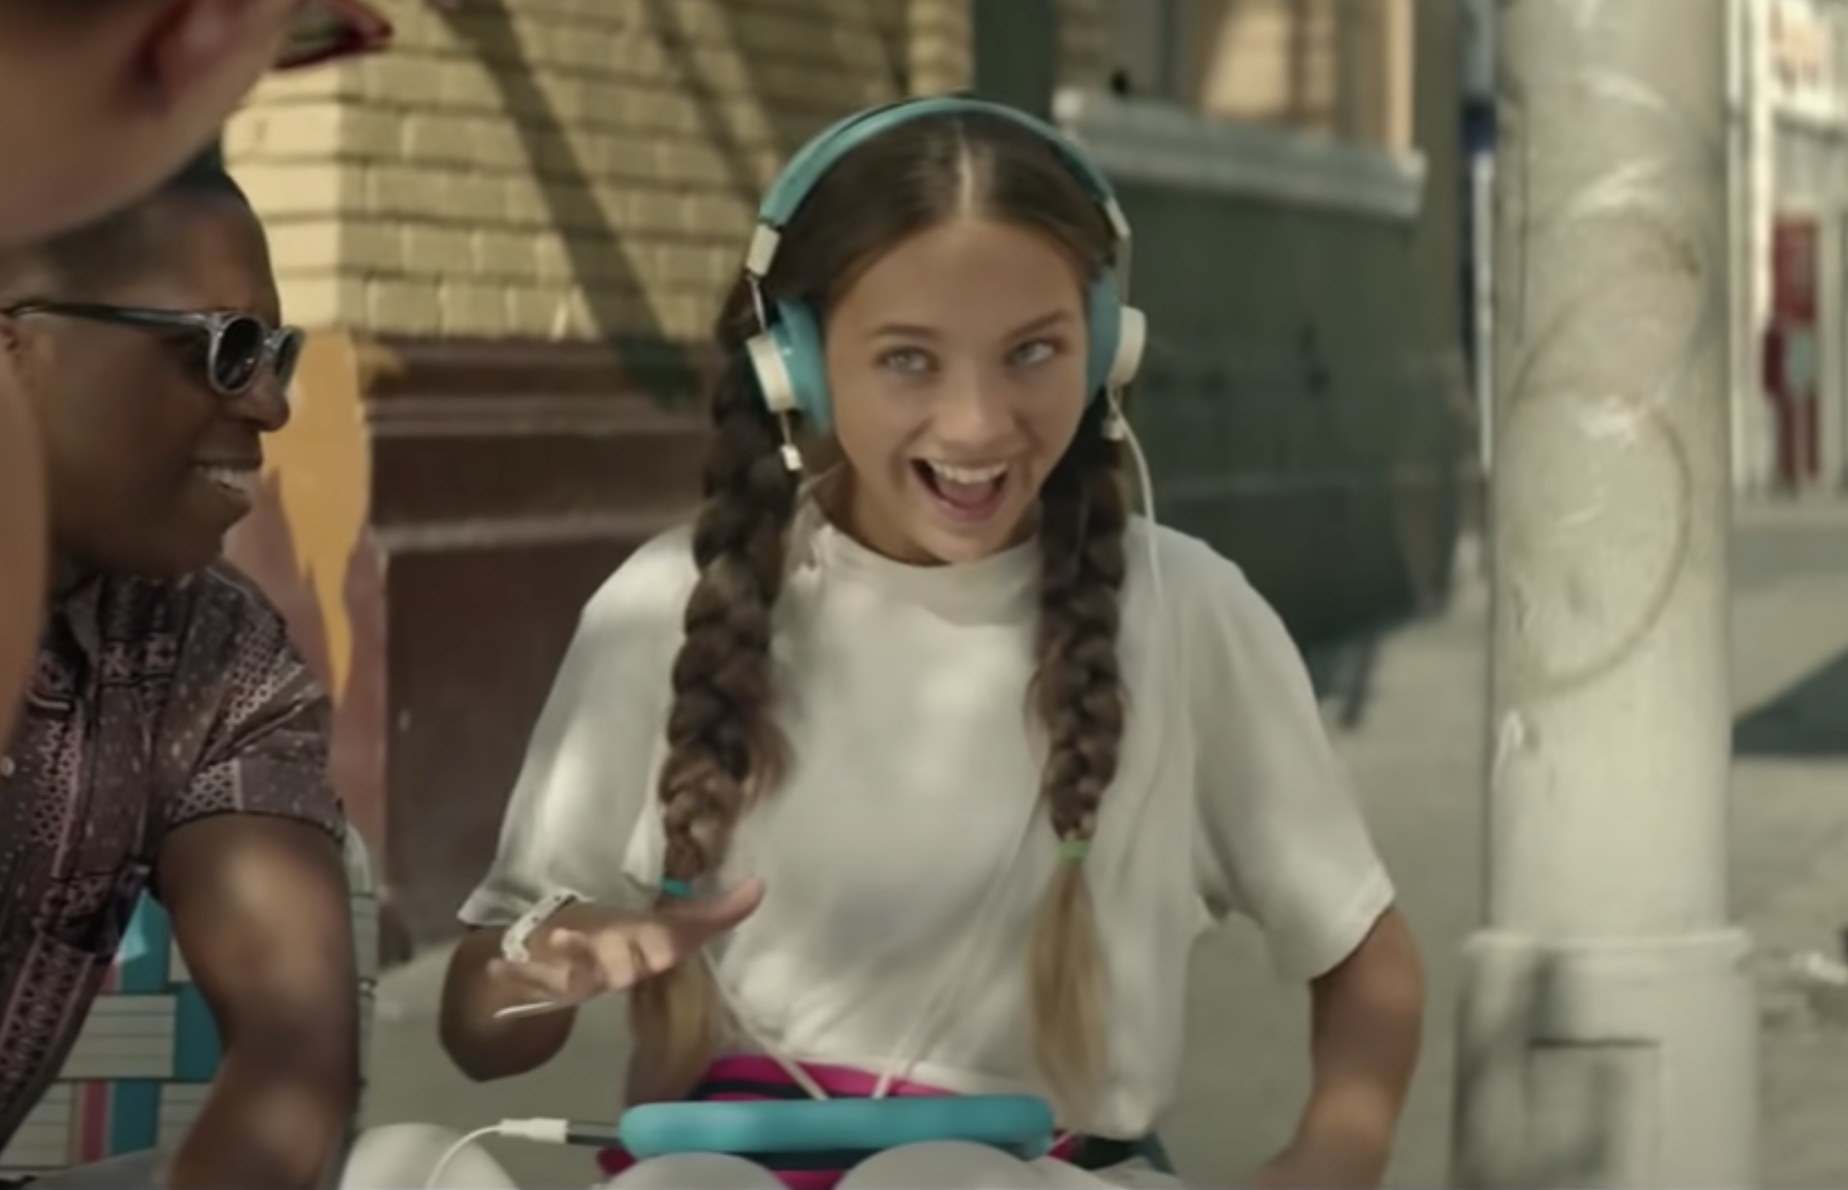 Maddie in the movie wearing headphones and holding a tablet